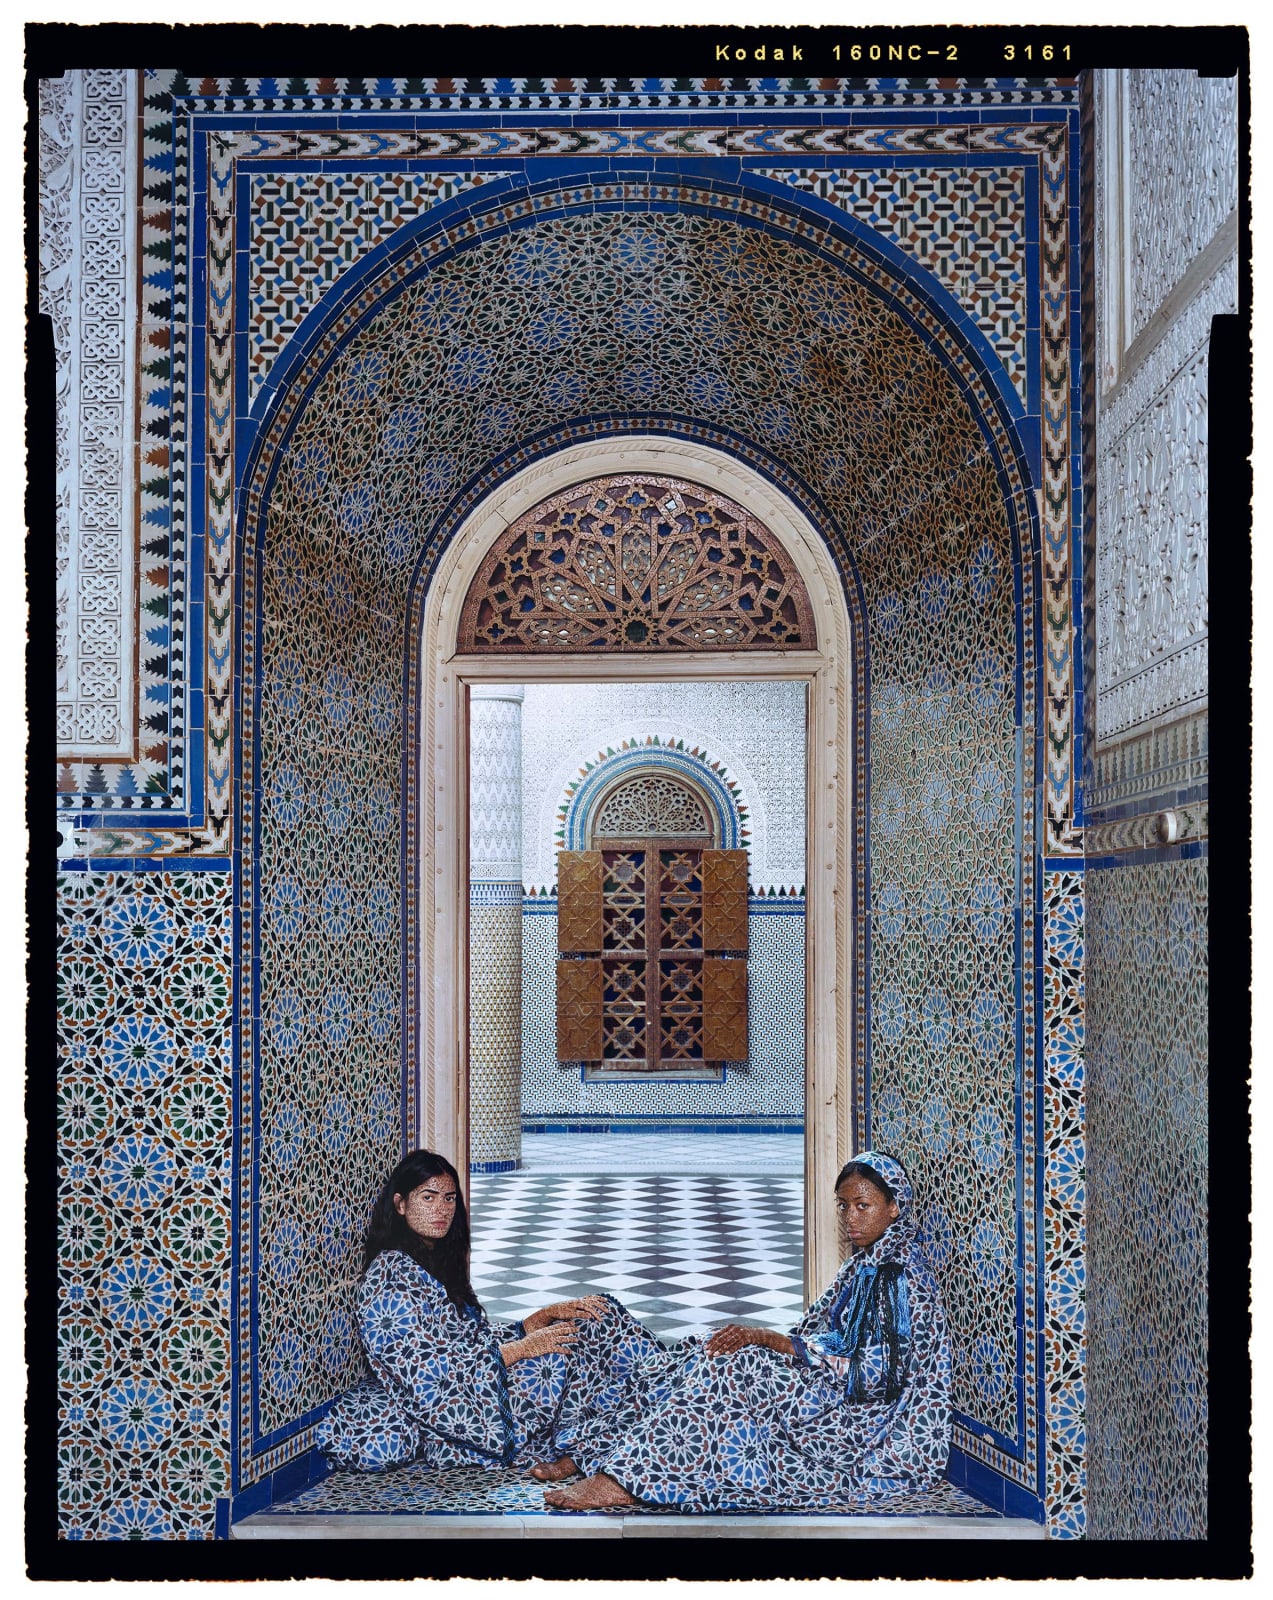 Lalla Essaydi, Harem #14B, Two women sitting in arched tiled doorway in Moroccan palace